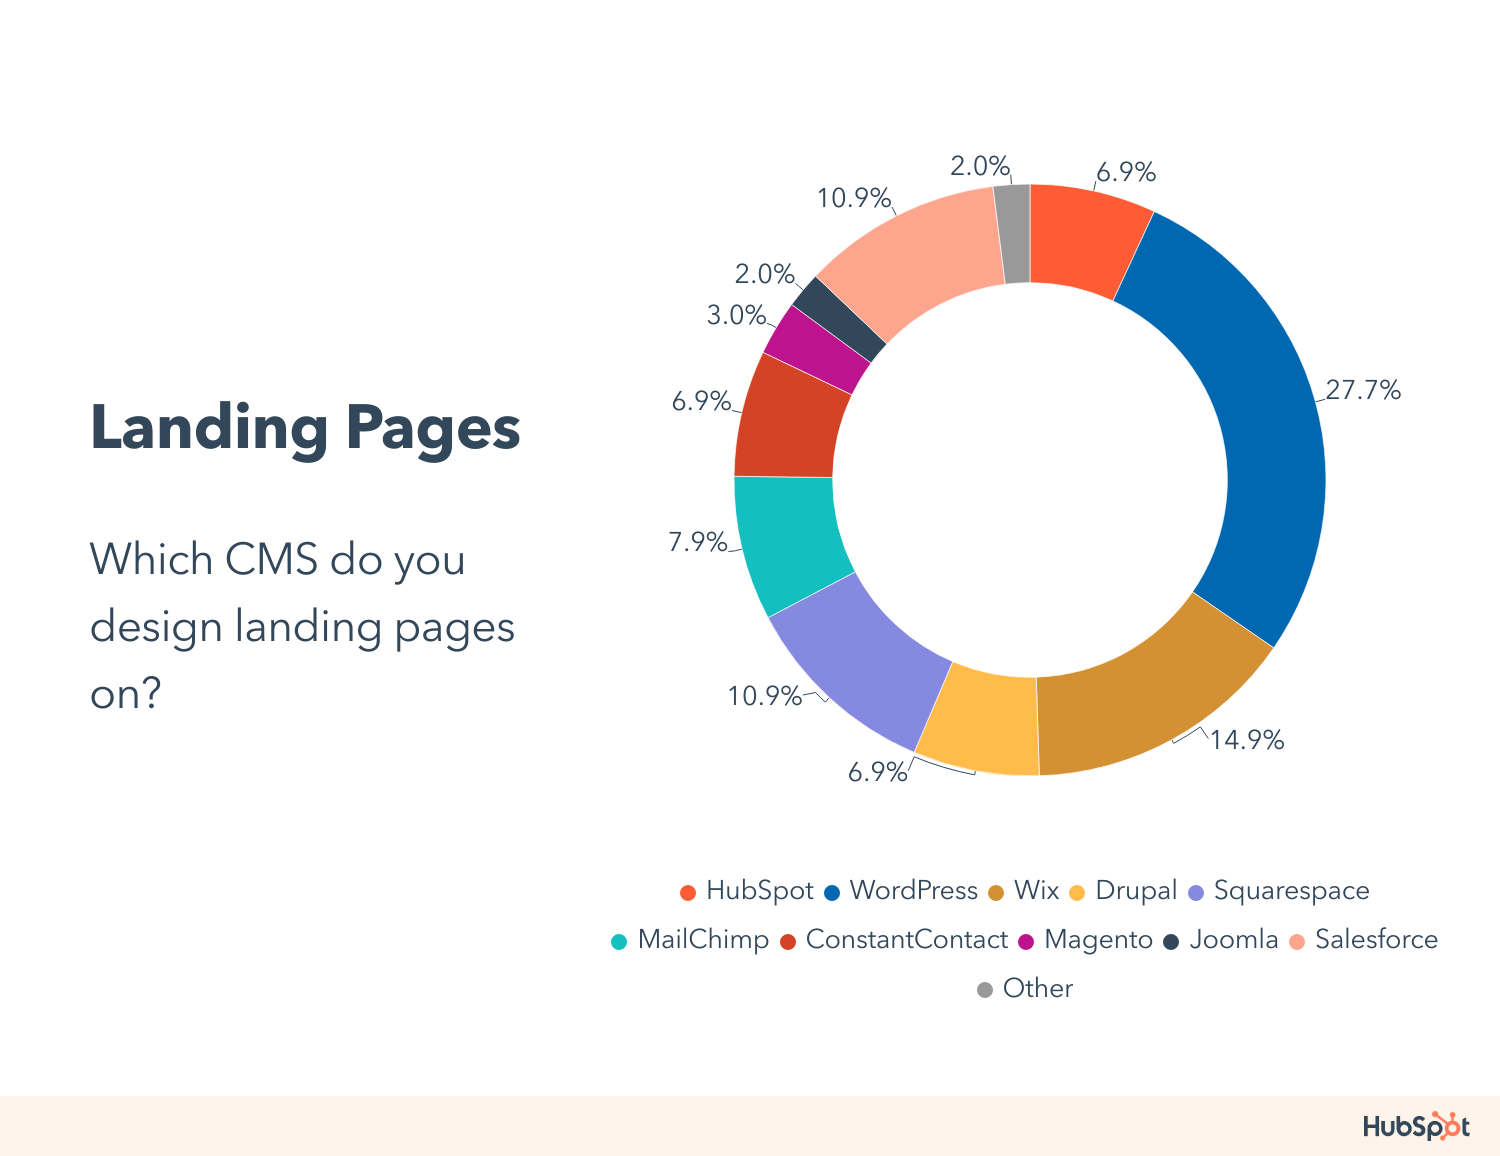 CMS brands used for landing page design